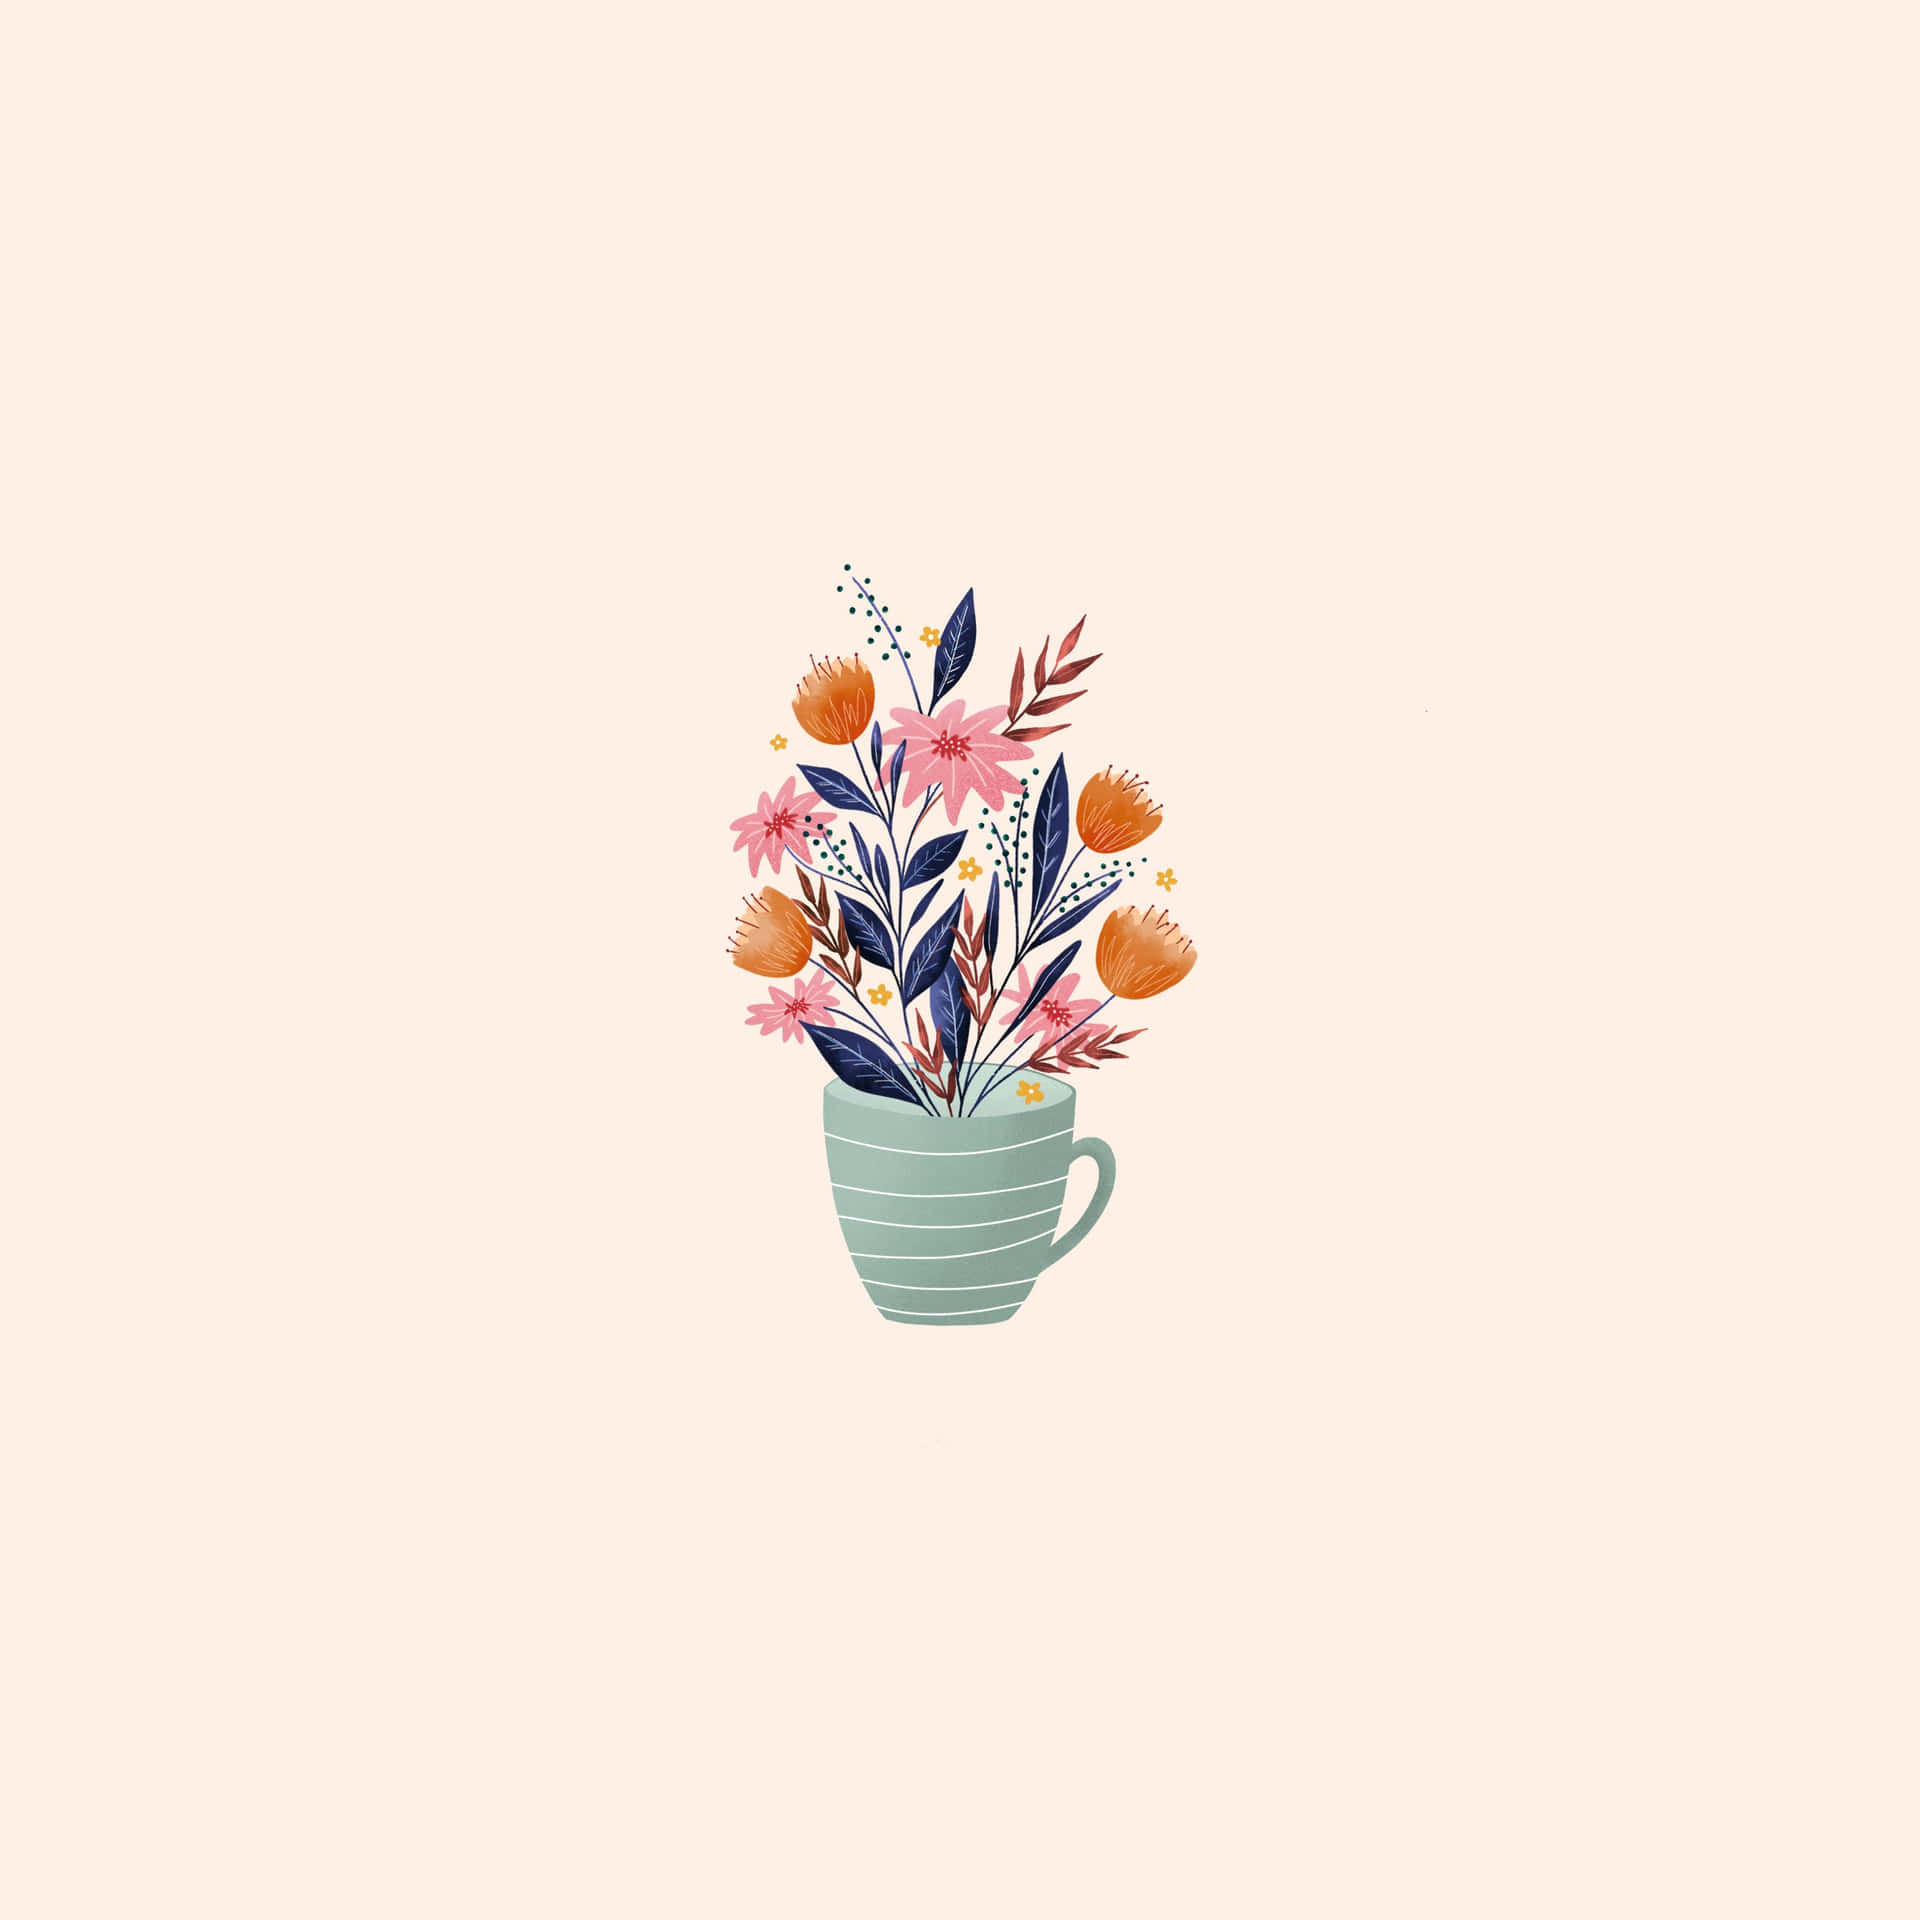 A Watercolor Illustration Of A Cup With Flowers In It Wallpaper